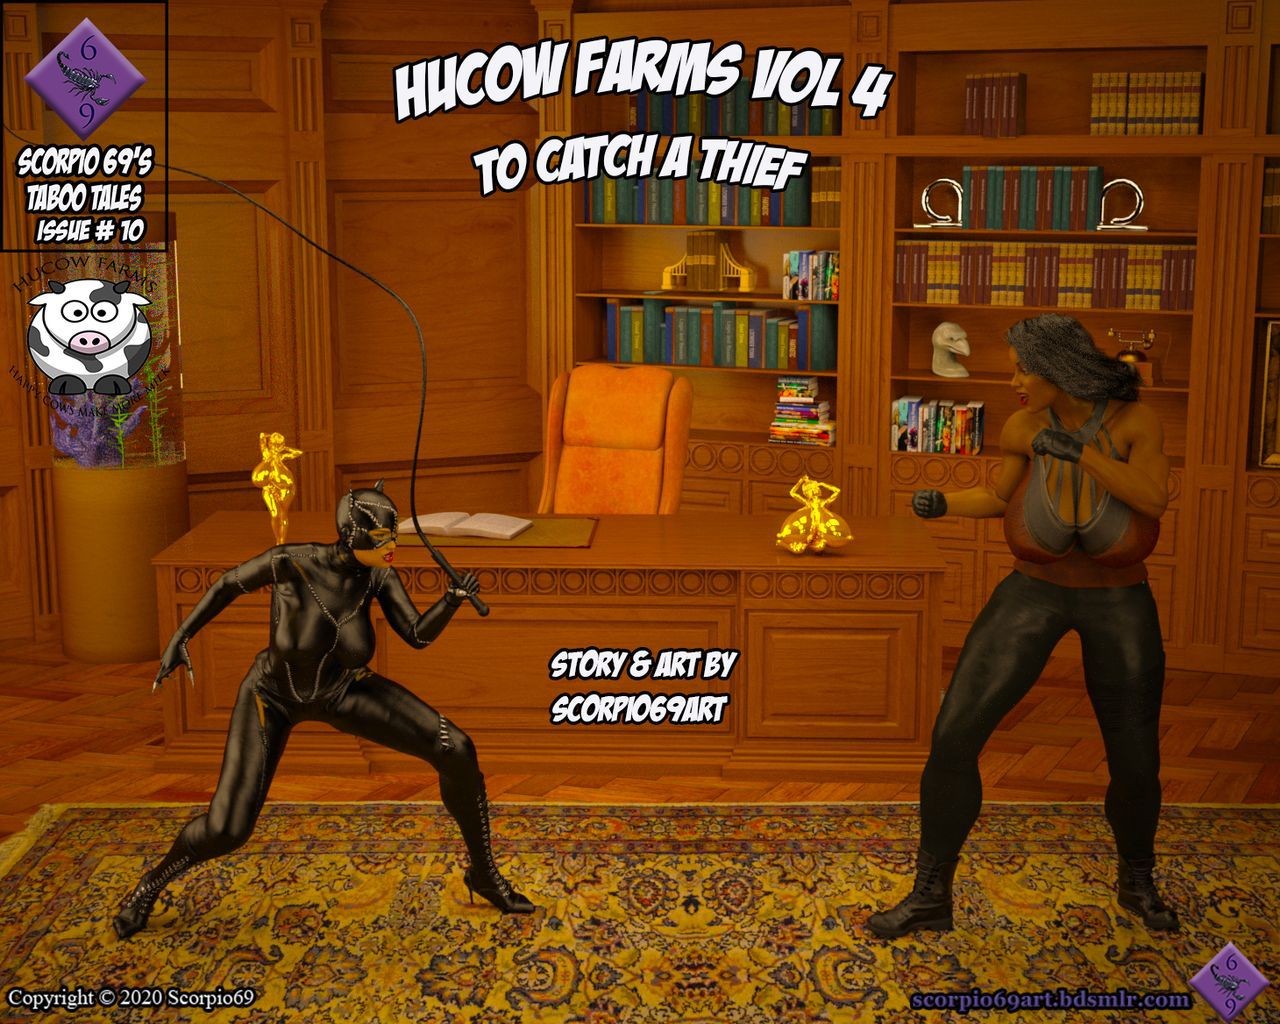 Exgf Hucow Farms Vol 4 - To Catch A Thief (Ongoing) Lesbians